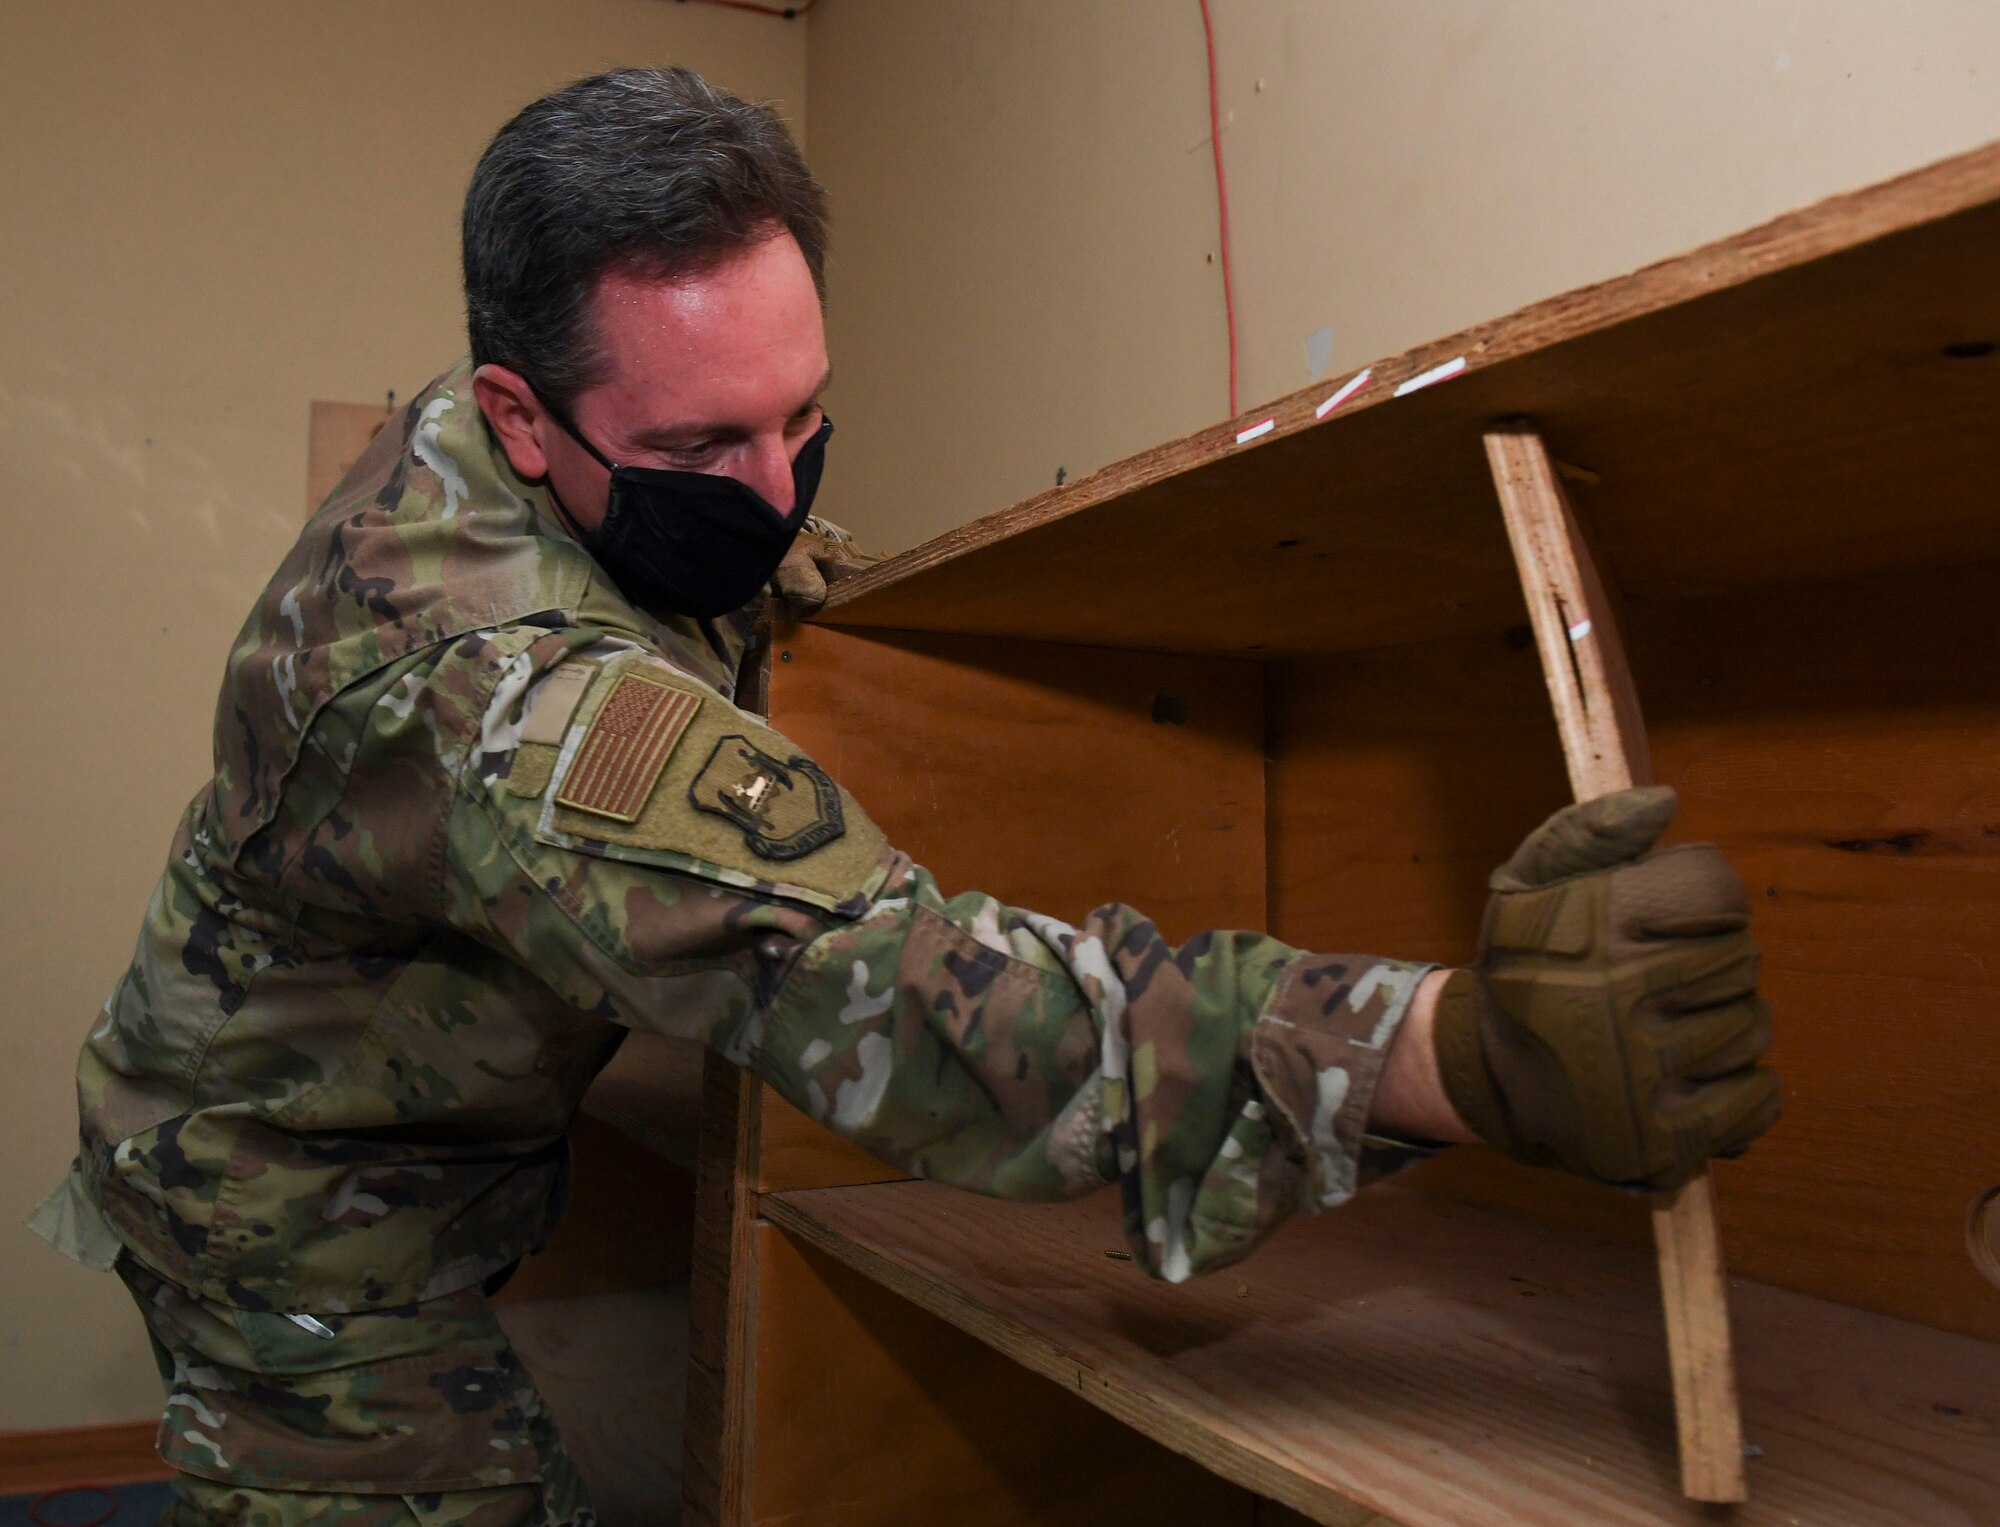 U.S. Air Force Lt. Col. John McMillen, 386th Air Expeditionary Wing director of staff, dismantles a shelf during a demolition day at Ali Al Salem Air Base, Kuwait, Oct. 21, 2020.